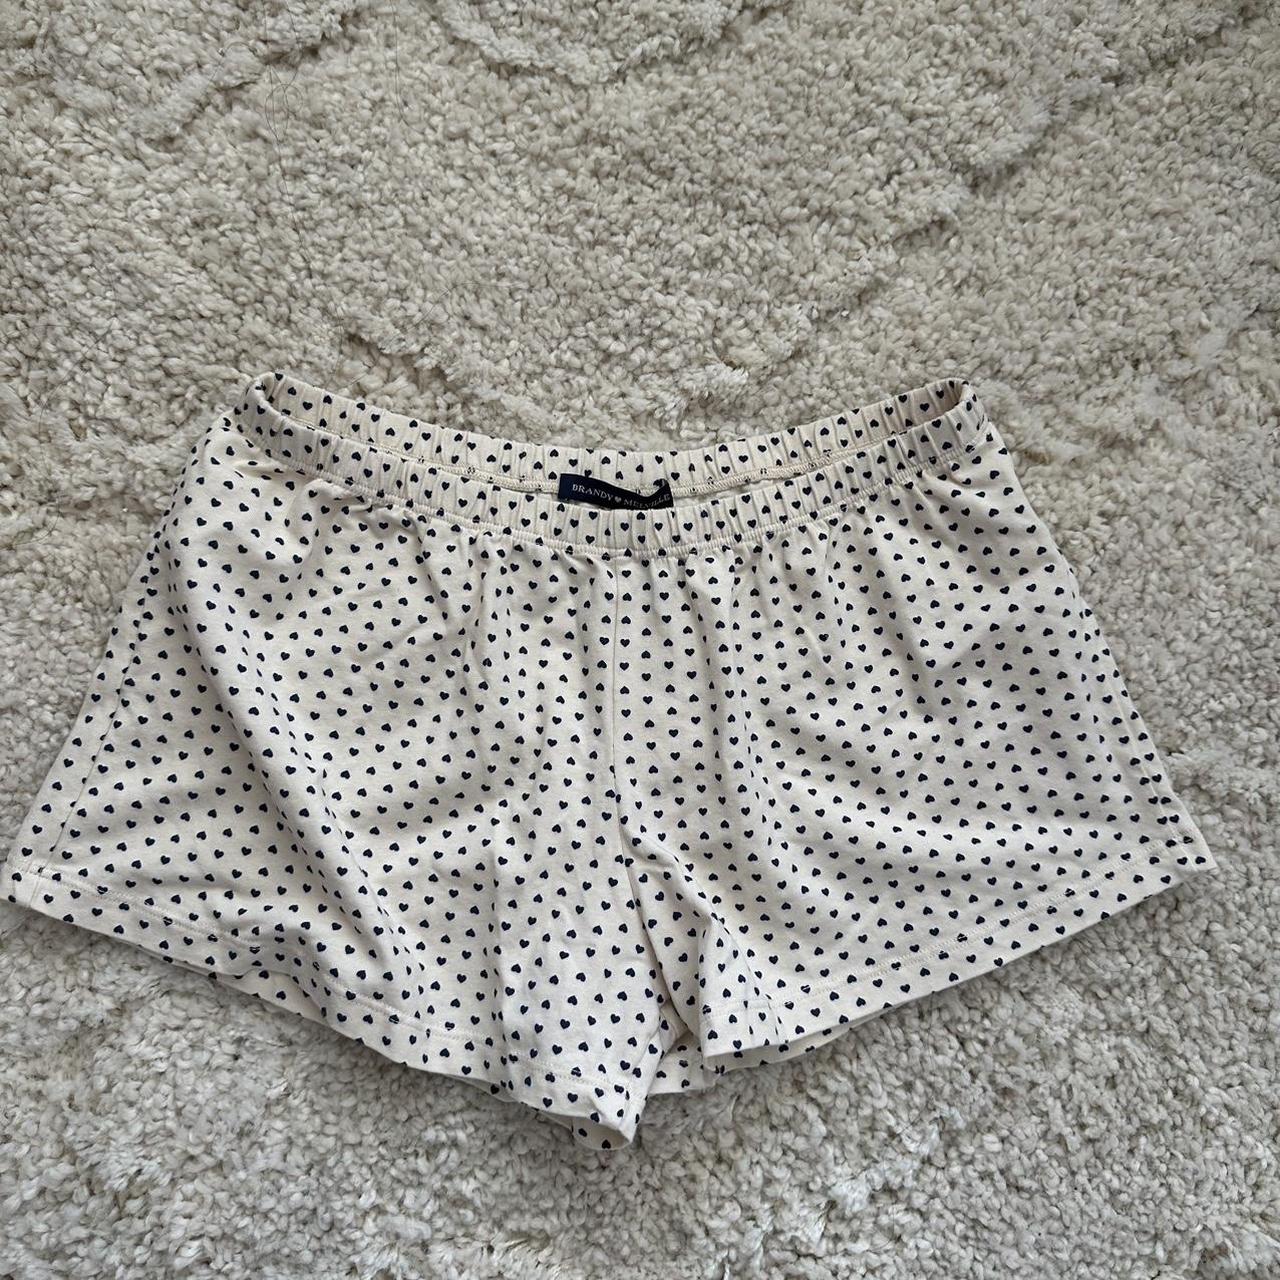 Brandy Melville white with blue heart shorts - Depop